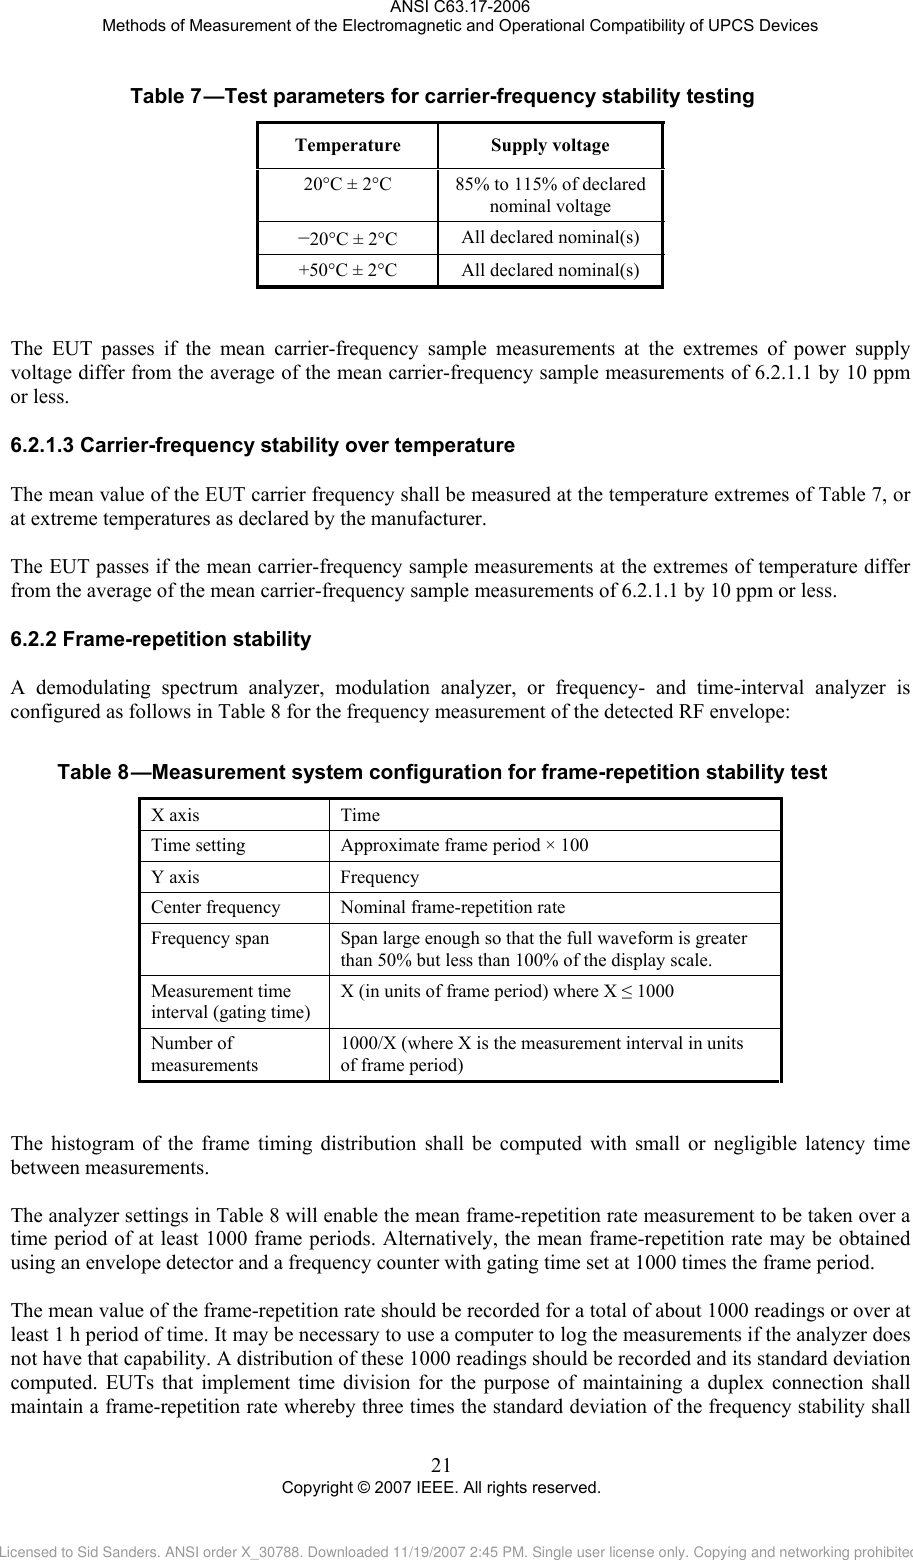 ANSI C63.17-2006 Methods of Measurement of the Electromagnetic and Operational Compatibility of UPCS Devices Table 7 —Test parameters for carrier-frequency stability testing Temperature Supply voltage 20°C ± 2°C  85% to 115% of declared nominal voltage −20°C ± 2°C  All declared nominal(s) +50°C ± 2°C  All declared nominal(s)   The EUT passes if the mean carrier-frequency sample measurements at the extremes of power supply voltage differ from the average of the mean carrier-frequency sample measurements of 6.2.1.1 by 10 ppm or less.  6.2.1.36.2.2Table 8 Carrier-frequency stability over temperature The mean value of the EUT carrier frequency shall be measured at the temperature extremes of Table 7, or at extreme temperatures as declared by the manufacturer.  The EUT passes if the mean carrier-frequency sample measurements at the extremes of temperature differ from the average of the mean carrier-frequency sample measurements of 6.2.1.1 by 10 ppm or less.  Frame-repetition stability A demodulating spectrum analyzer, modulation analyzer, or frequency- and time-interval analyzer is configured as follows in Table 8 for the frequency measurement of the detected RF envelope:   —Measurement system configuration for frame-repetition stability test X axis  Time Time setting  Approximate frame period × 100 Y axis  Frequency Center frequency  Nominal frame-repetition rate Frequency span  Span large enough so that the full waveform is greater than 50% but less than 100% of the display scale. Measurement time interval (gating time) X (in units of frame period) where X ≤ 1000 Number of measurements 1000/X (where X is the measurement interval in units  of frame period)   The histogram of the frame timing distribution shall be computed with small or negligible latency time between measurements.   The analyzer settings in Table 8 will enable the mean frame-repetition rate measurement to be taken over a time period of at least 1000 frame periods. Alternatively, the mean frame-repetition rate may be obtained using an envelope detector and a frequency counter with gating time set at 1000 times the frame period.  The mean value of the frame-repetition rate should be recorded for a total of about 1000 readings or over at least 1 h period of time. It may be necessary to use a computer to log the measurements if the analyzer does not have that capability. A distribution of these 1000 readings should be recorded and its standard deviation computed. EUTs that implement time division for the purpose of maintaining a duplex connection shall maintain a frame-repetition rate whereby three times the standard deviation of the frequency stability shall 21 Copyright © 2007 IEEE. All rights reserved. Licensed to Sid Sanders. ANSI order X_30788. Downloaded 11/19/2007 2:45 PM. Single user license only. Copying and networking prohibited.